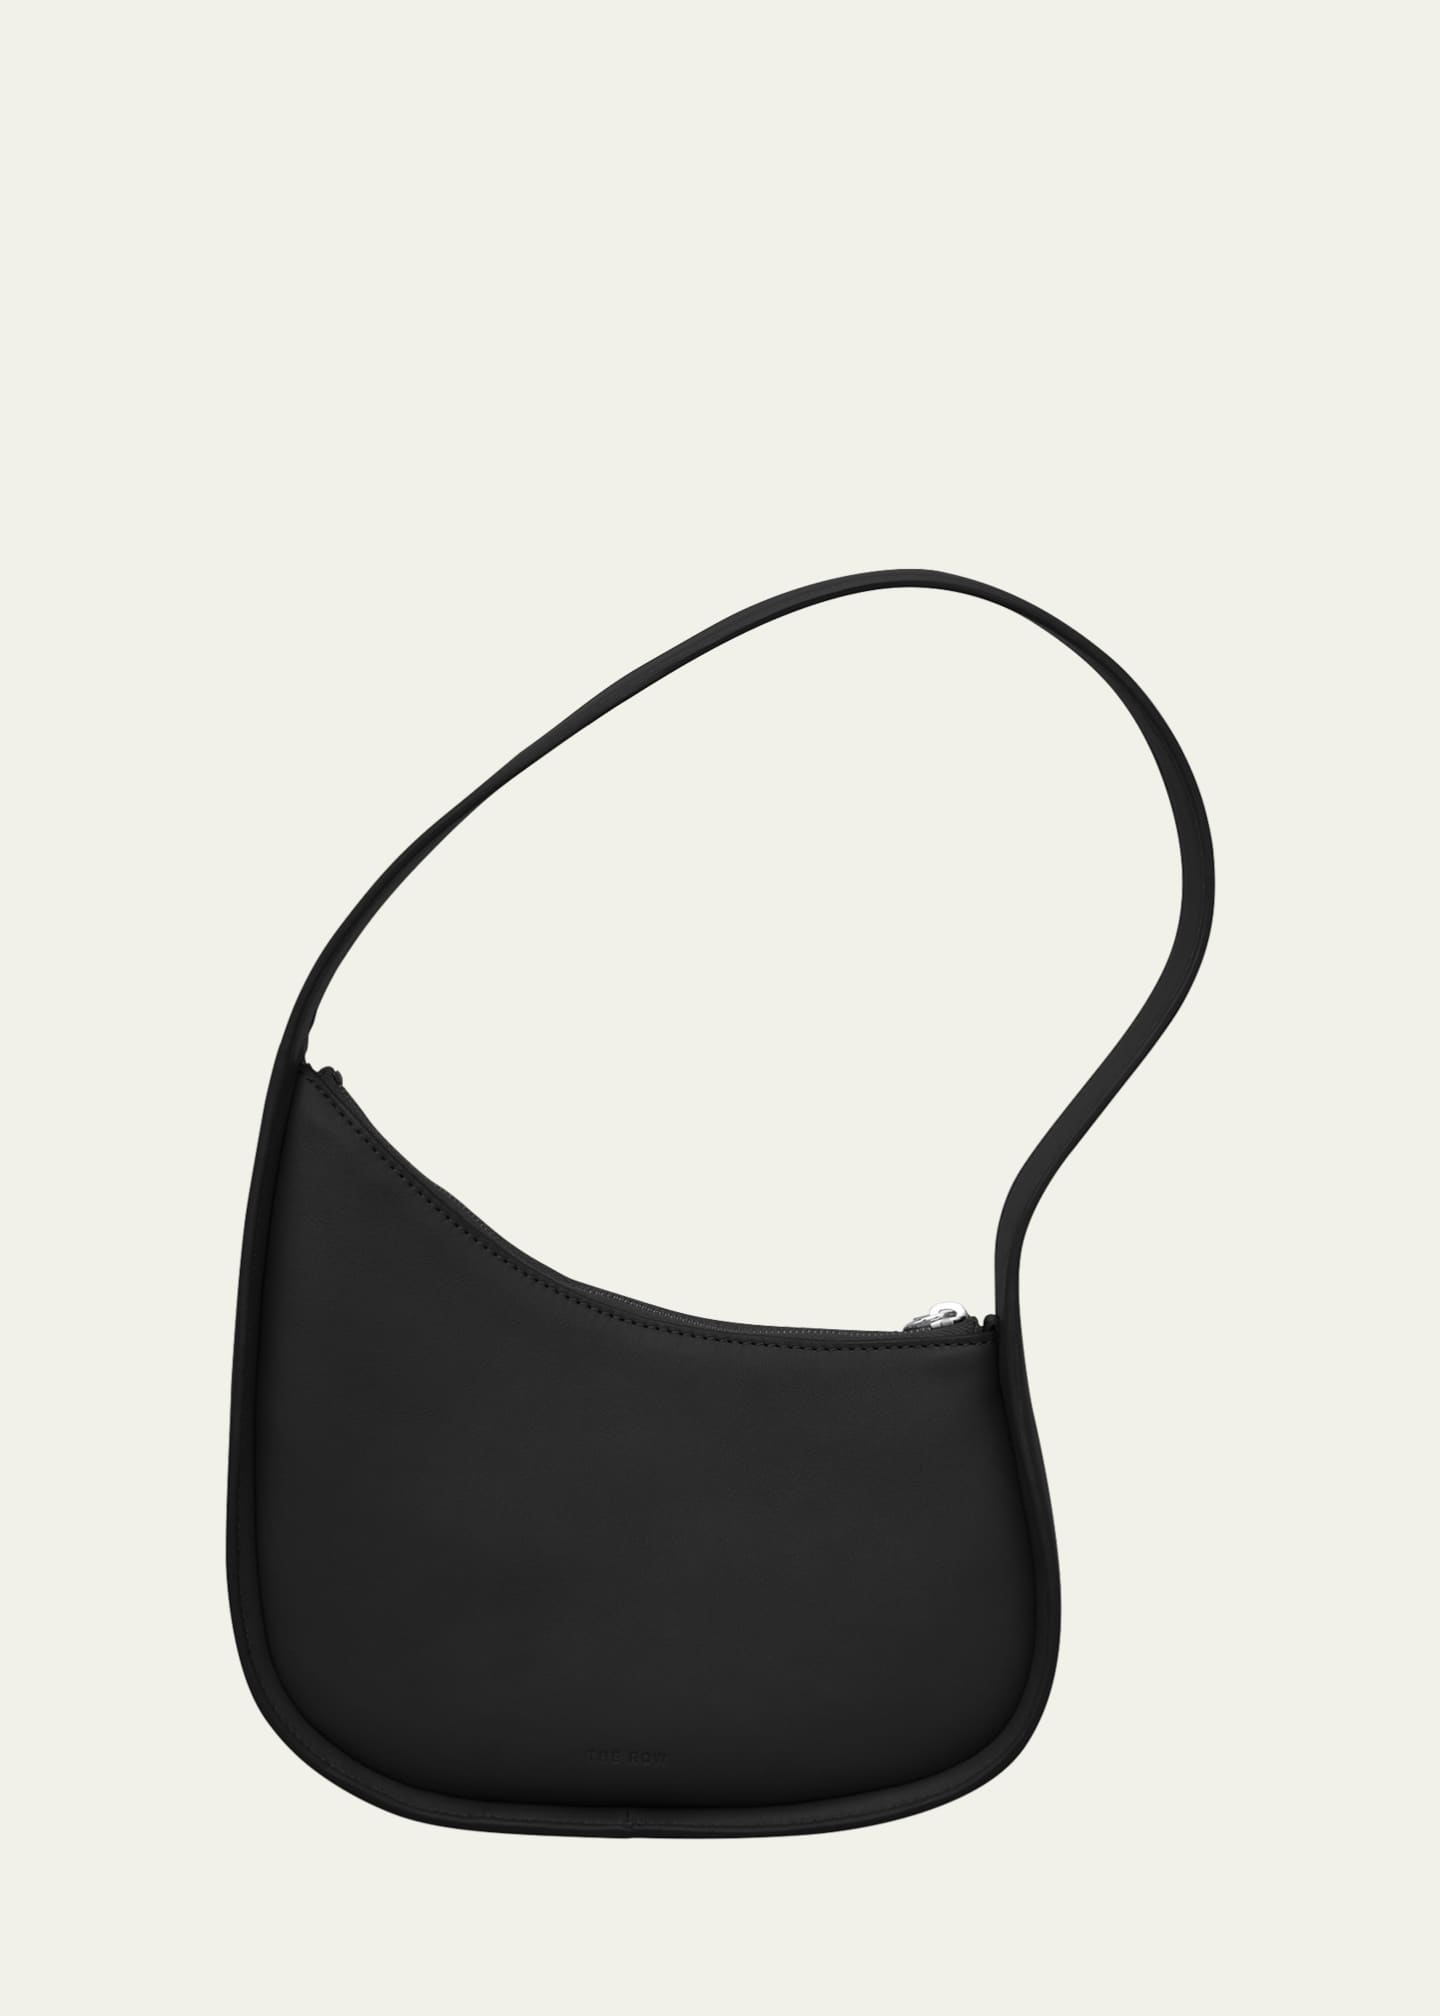 Half Moon Leather Shoulder Bag in Black - The Row